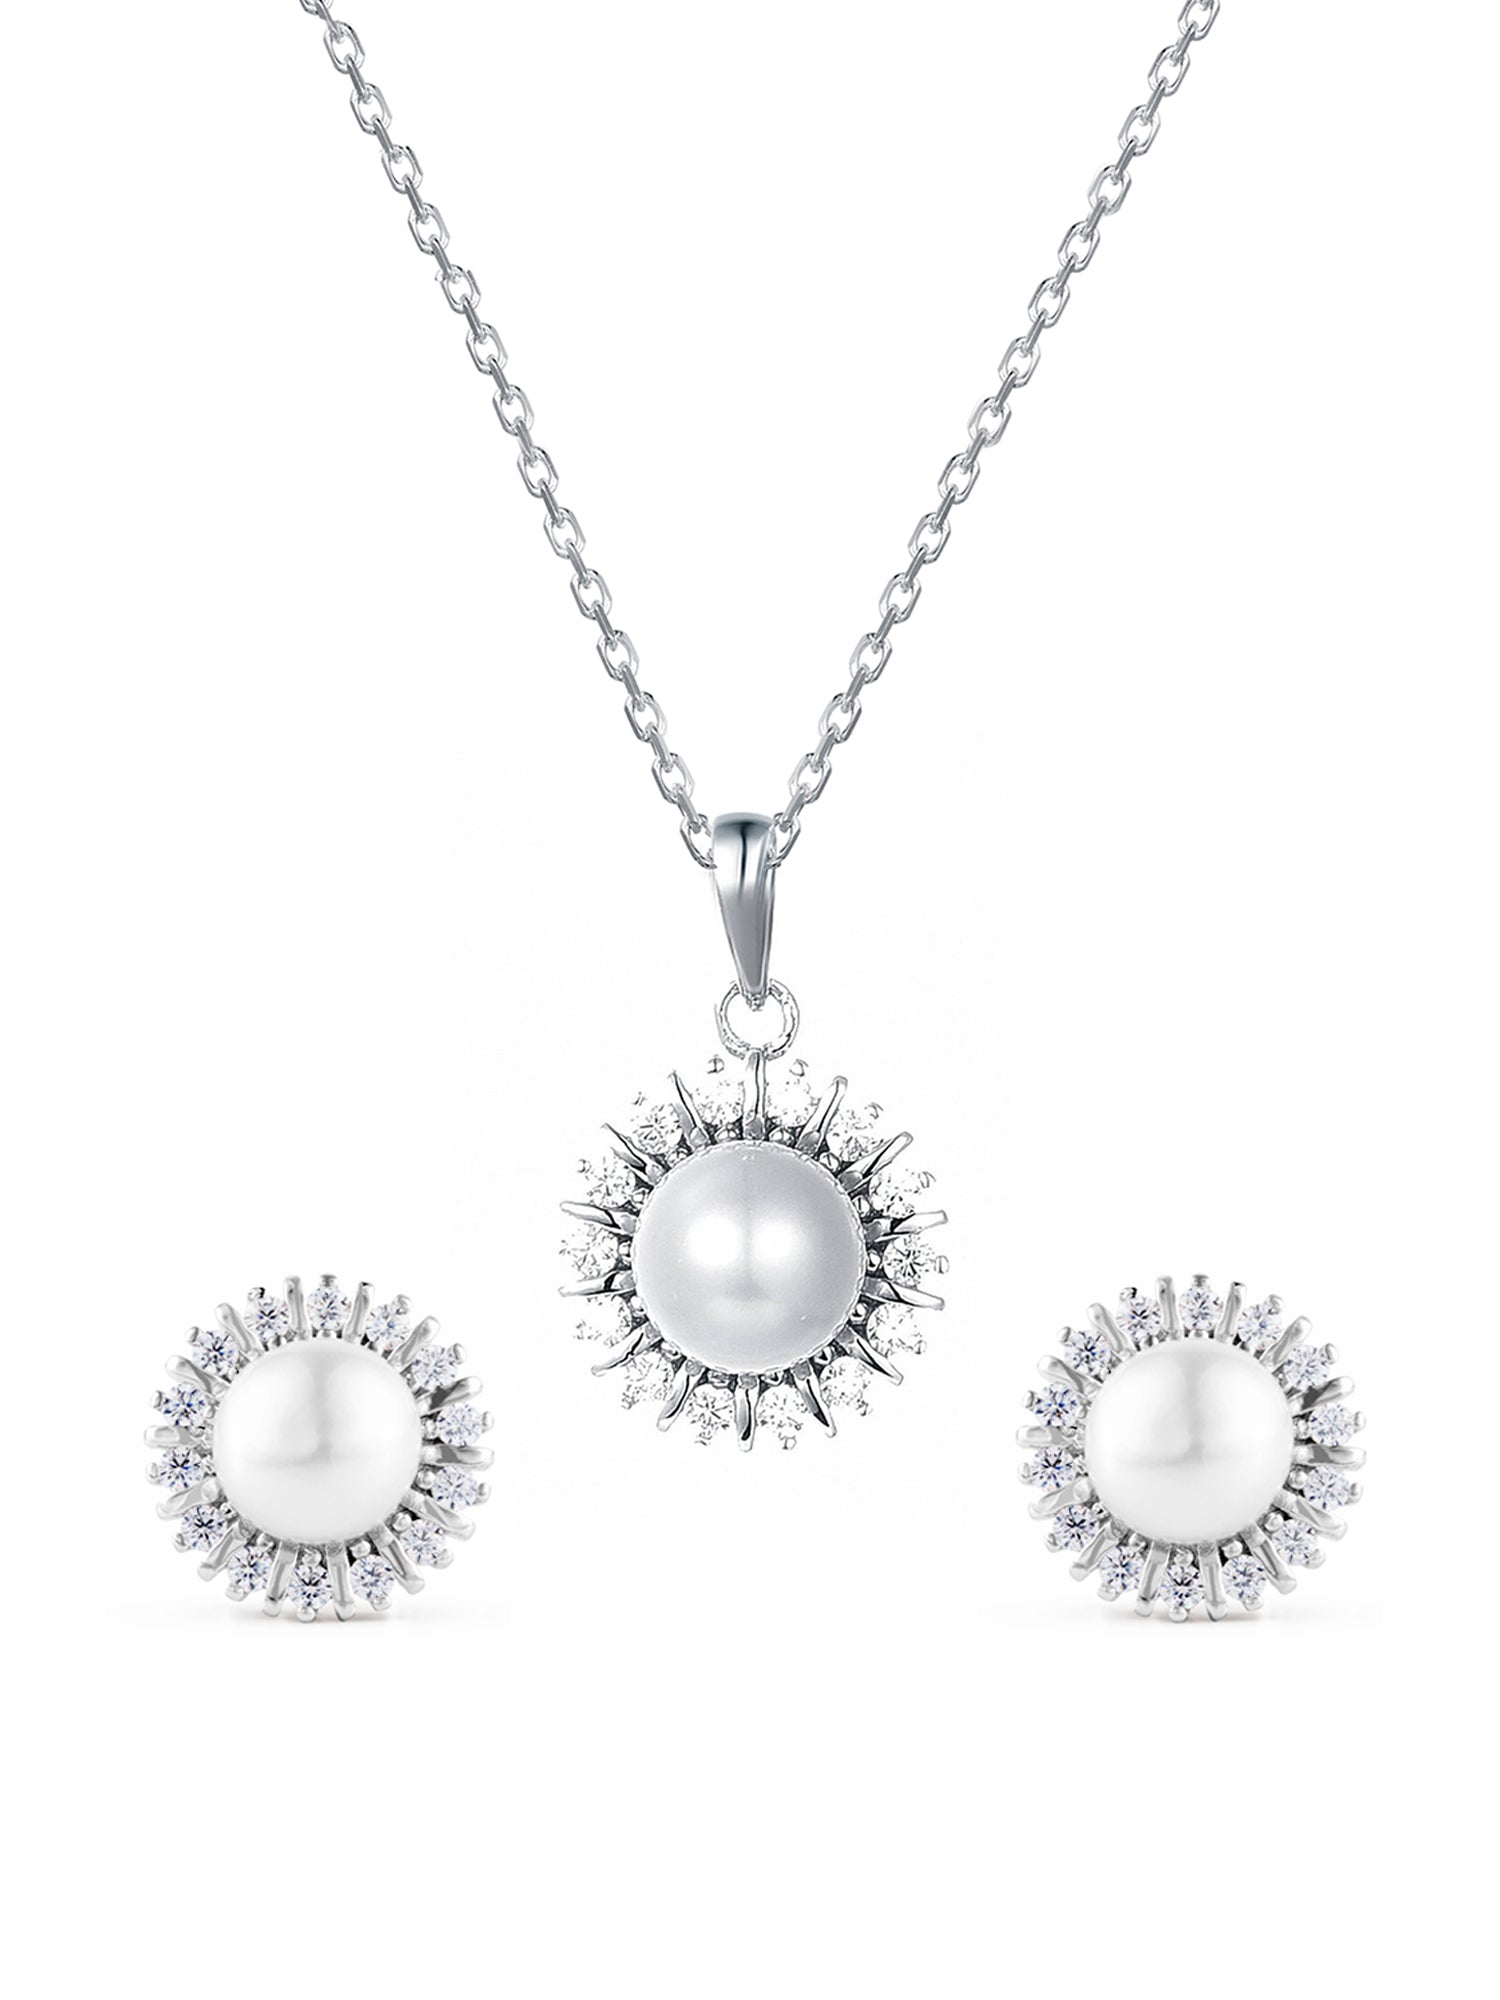 ORNATE JEWELS PURE PEARL NECKLACE WITH STUDS EARRINGS SET